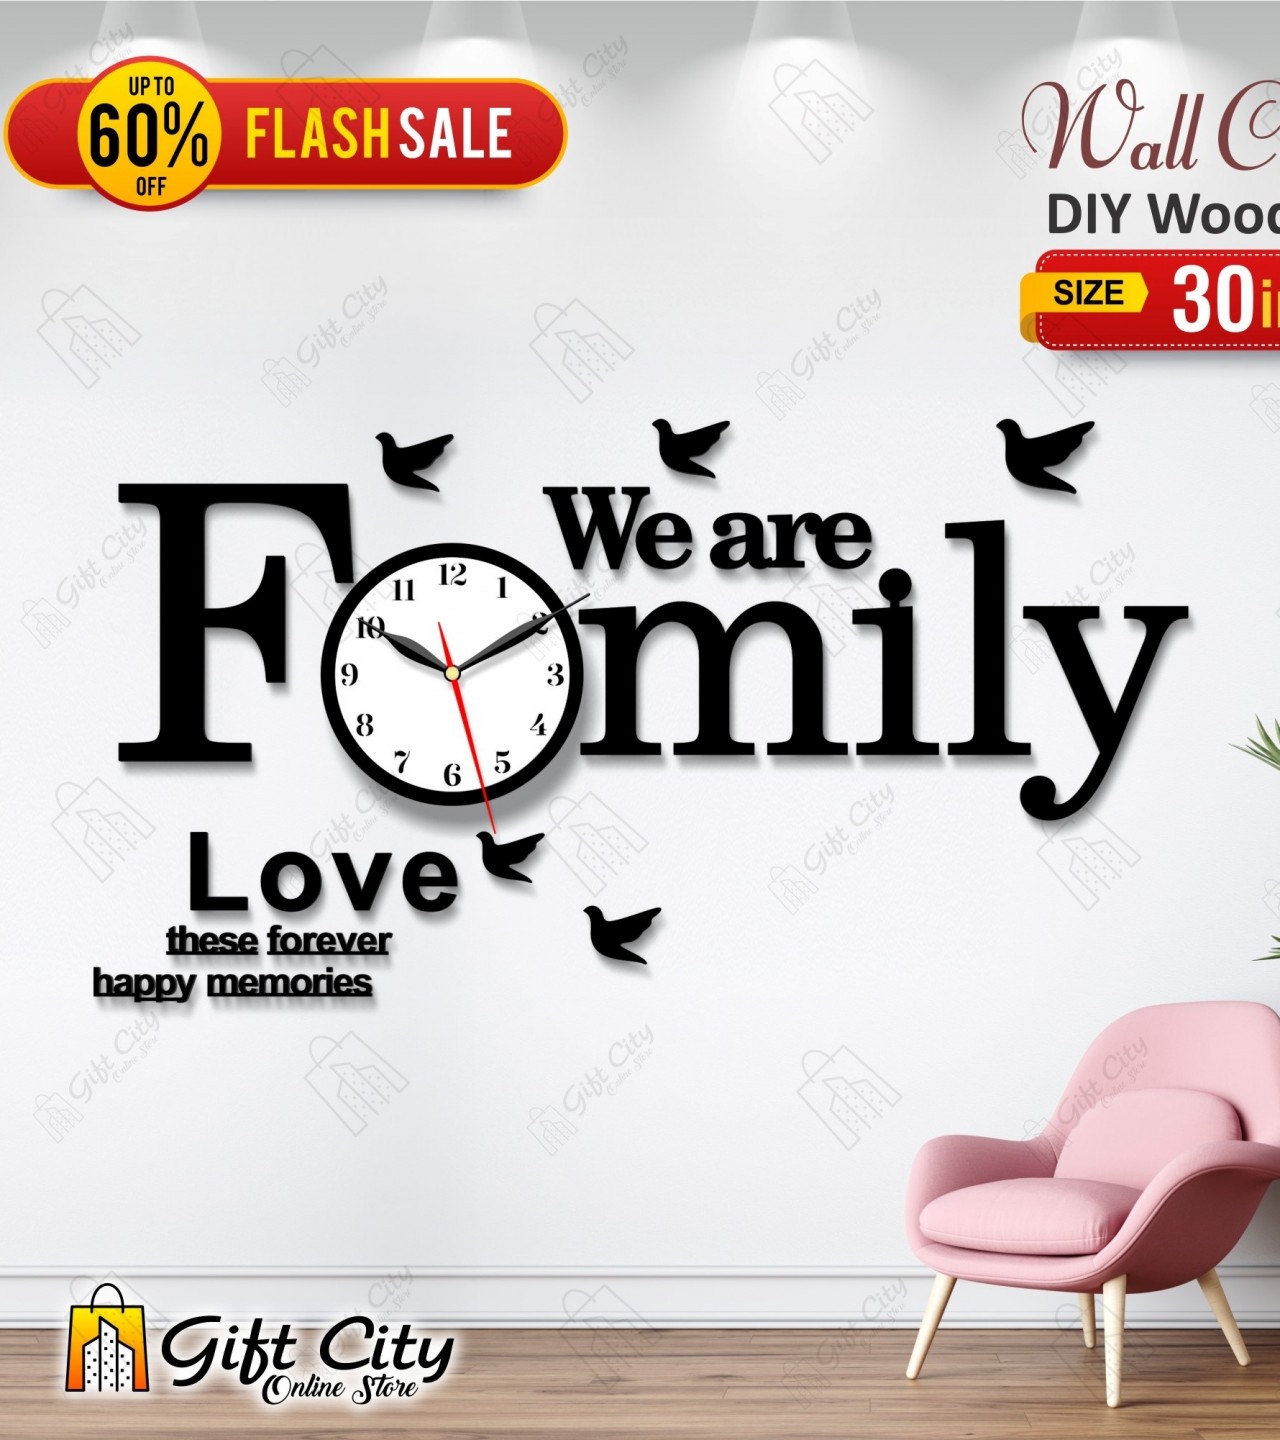 We are Family with Birds Wooden Wall Clock for Home and Offices, 3D Design Self Adhesive - GIFT City